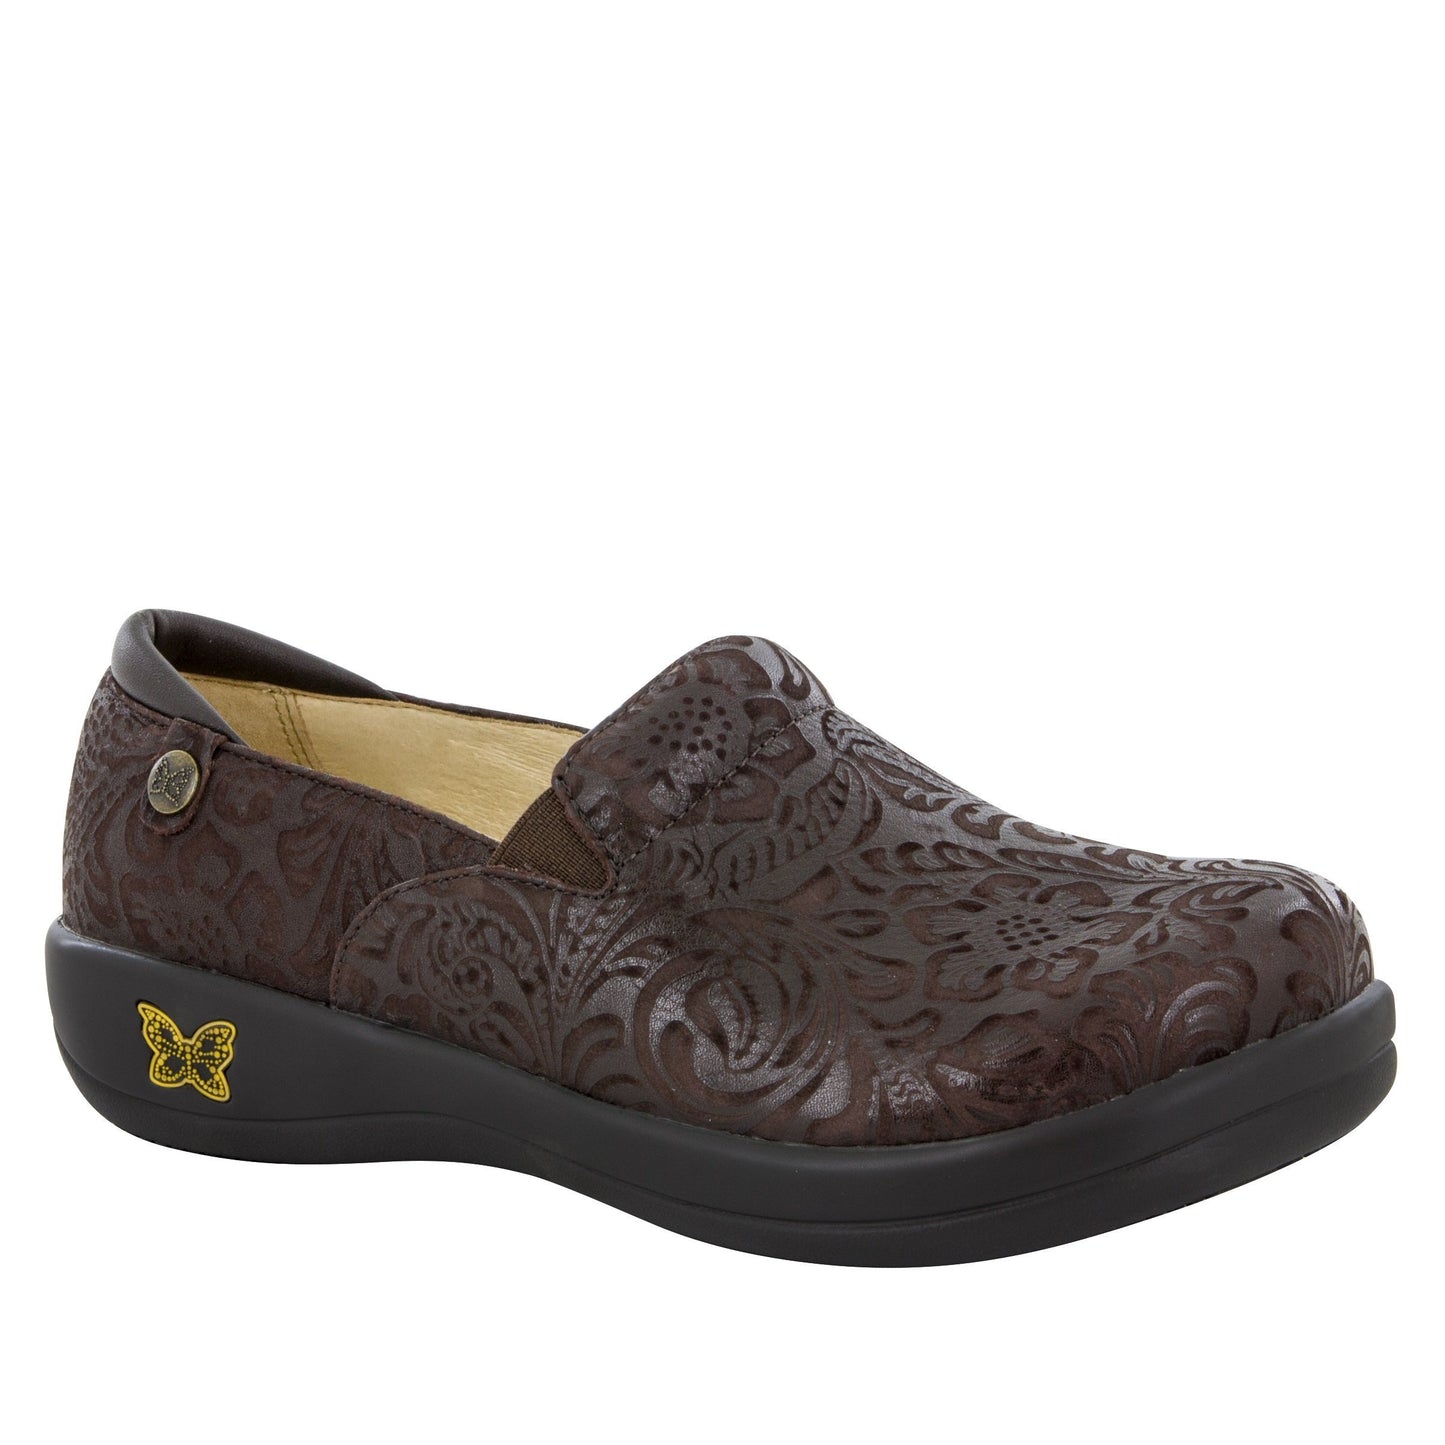 Alegria Sale Shoe Size 36 Keli Professional in Choco Embossed Paisley at Parker's Clothing and Shoes.